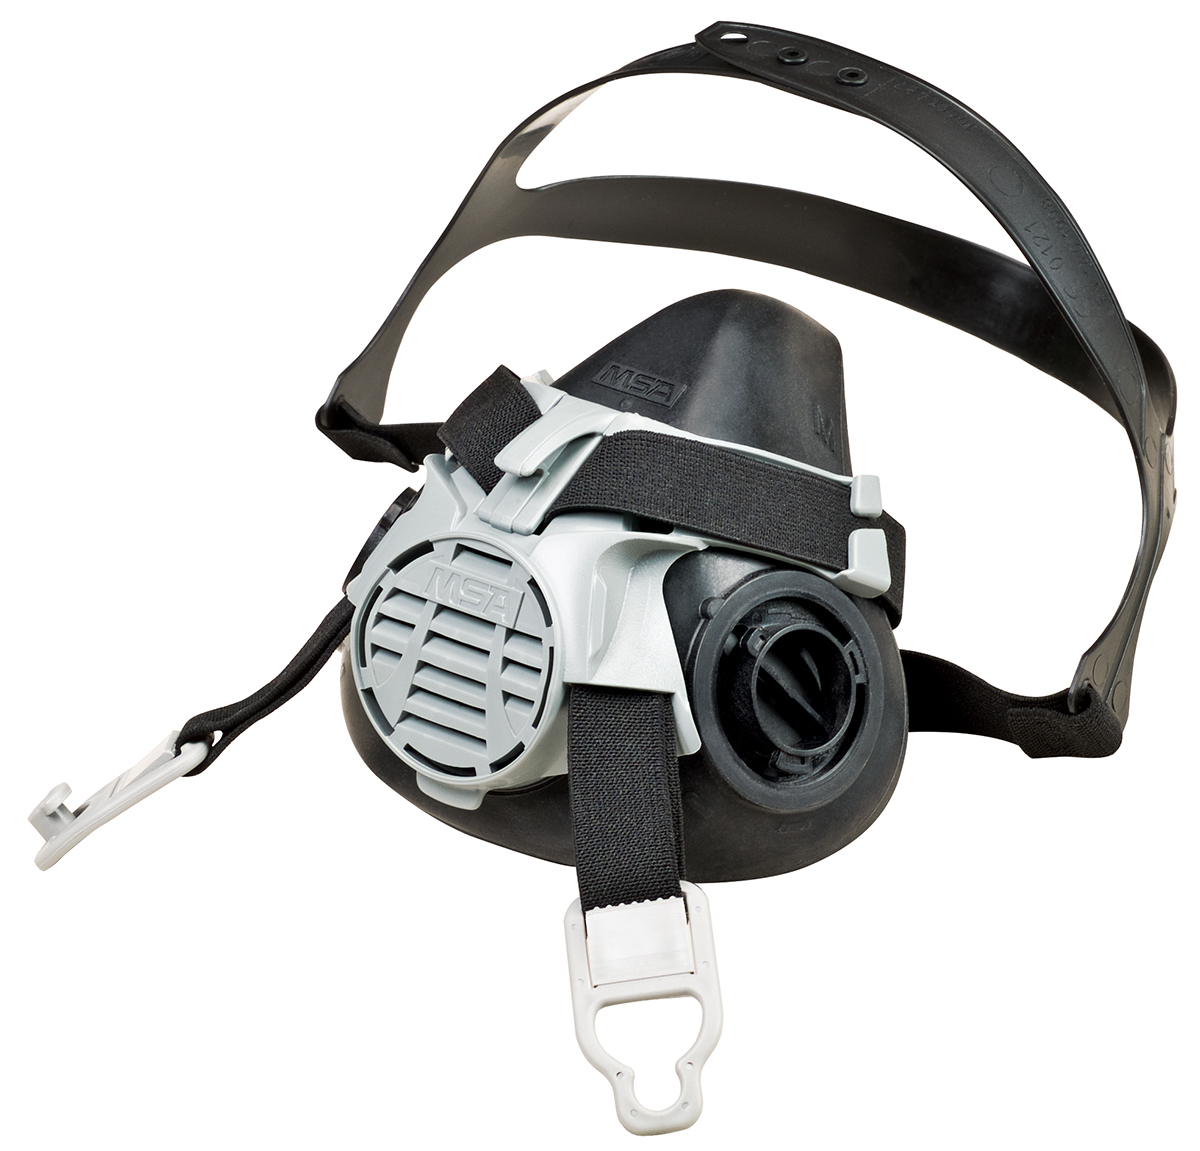 Advantage® 420 Small Advantage® 420 Series Half Mask Air Purifying Respirator (Availability restrictions apply.)